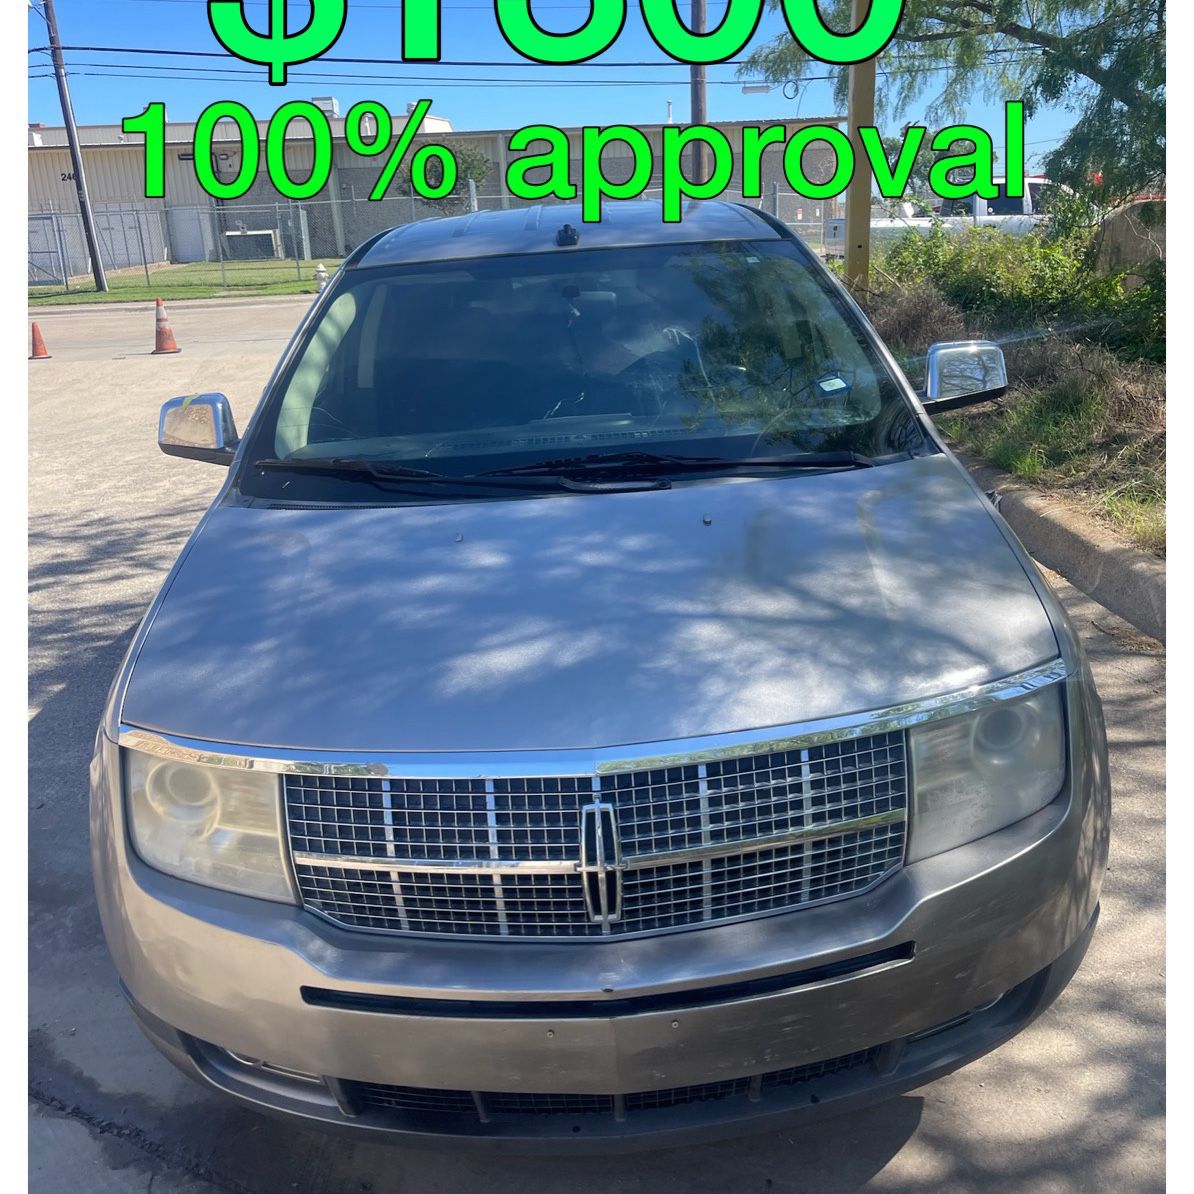 2010 Lincoln MkX 💯 % Approval 